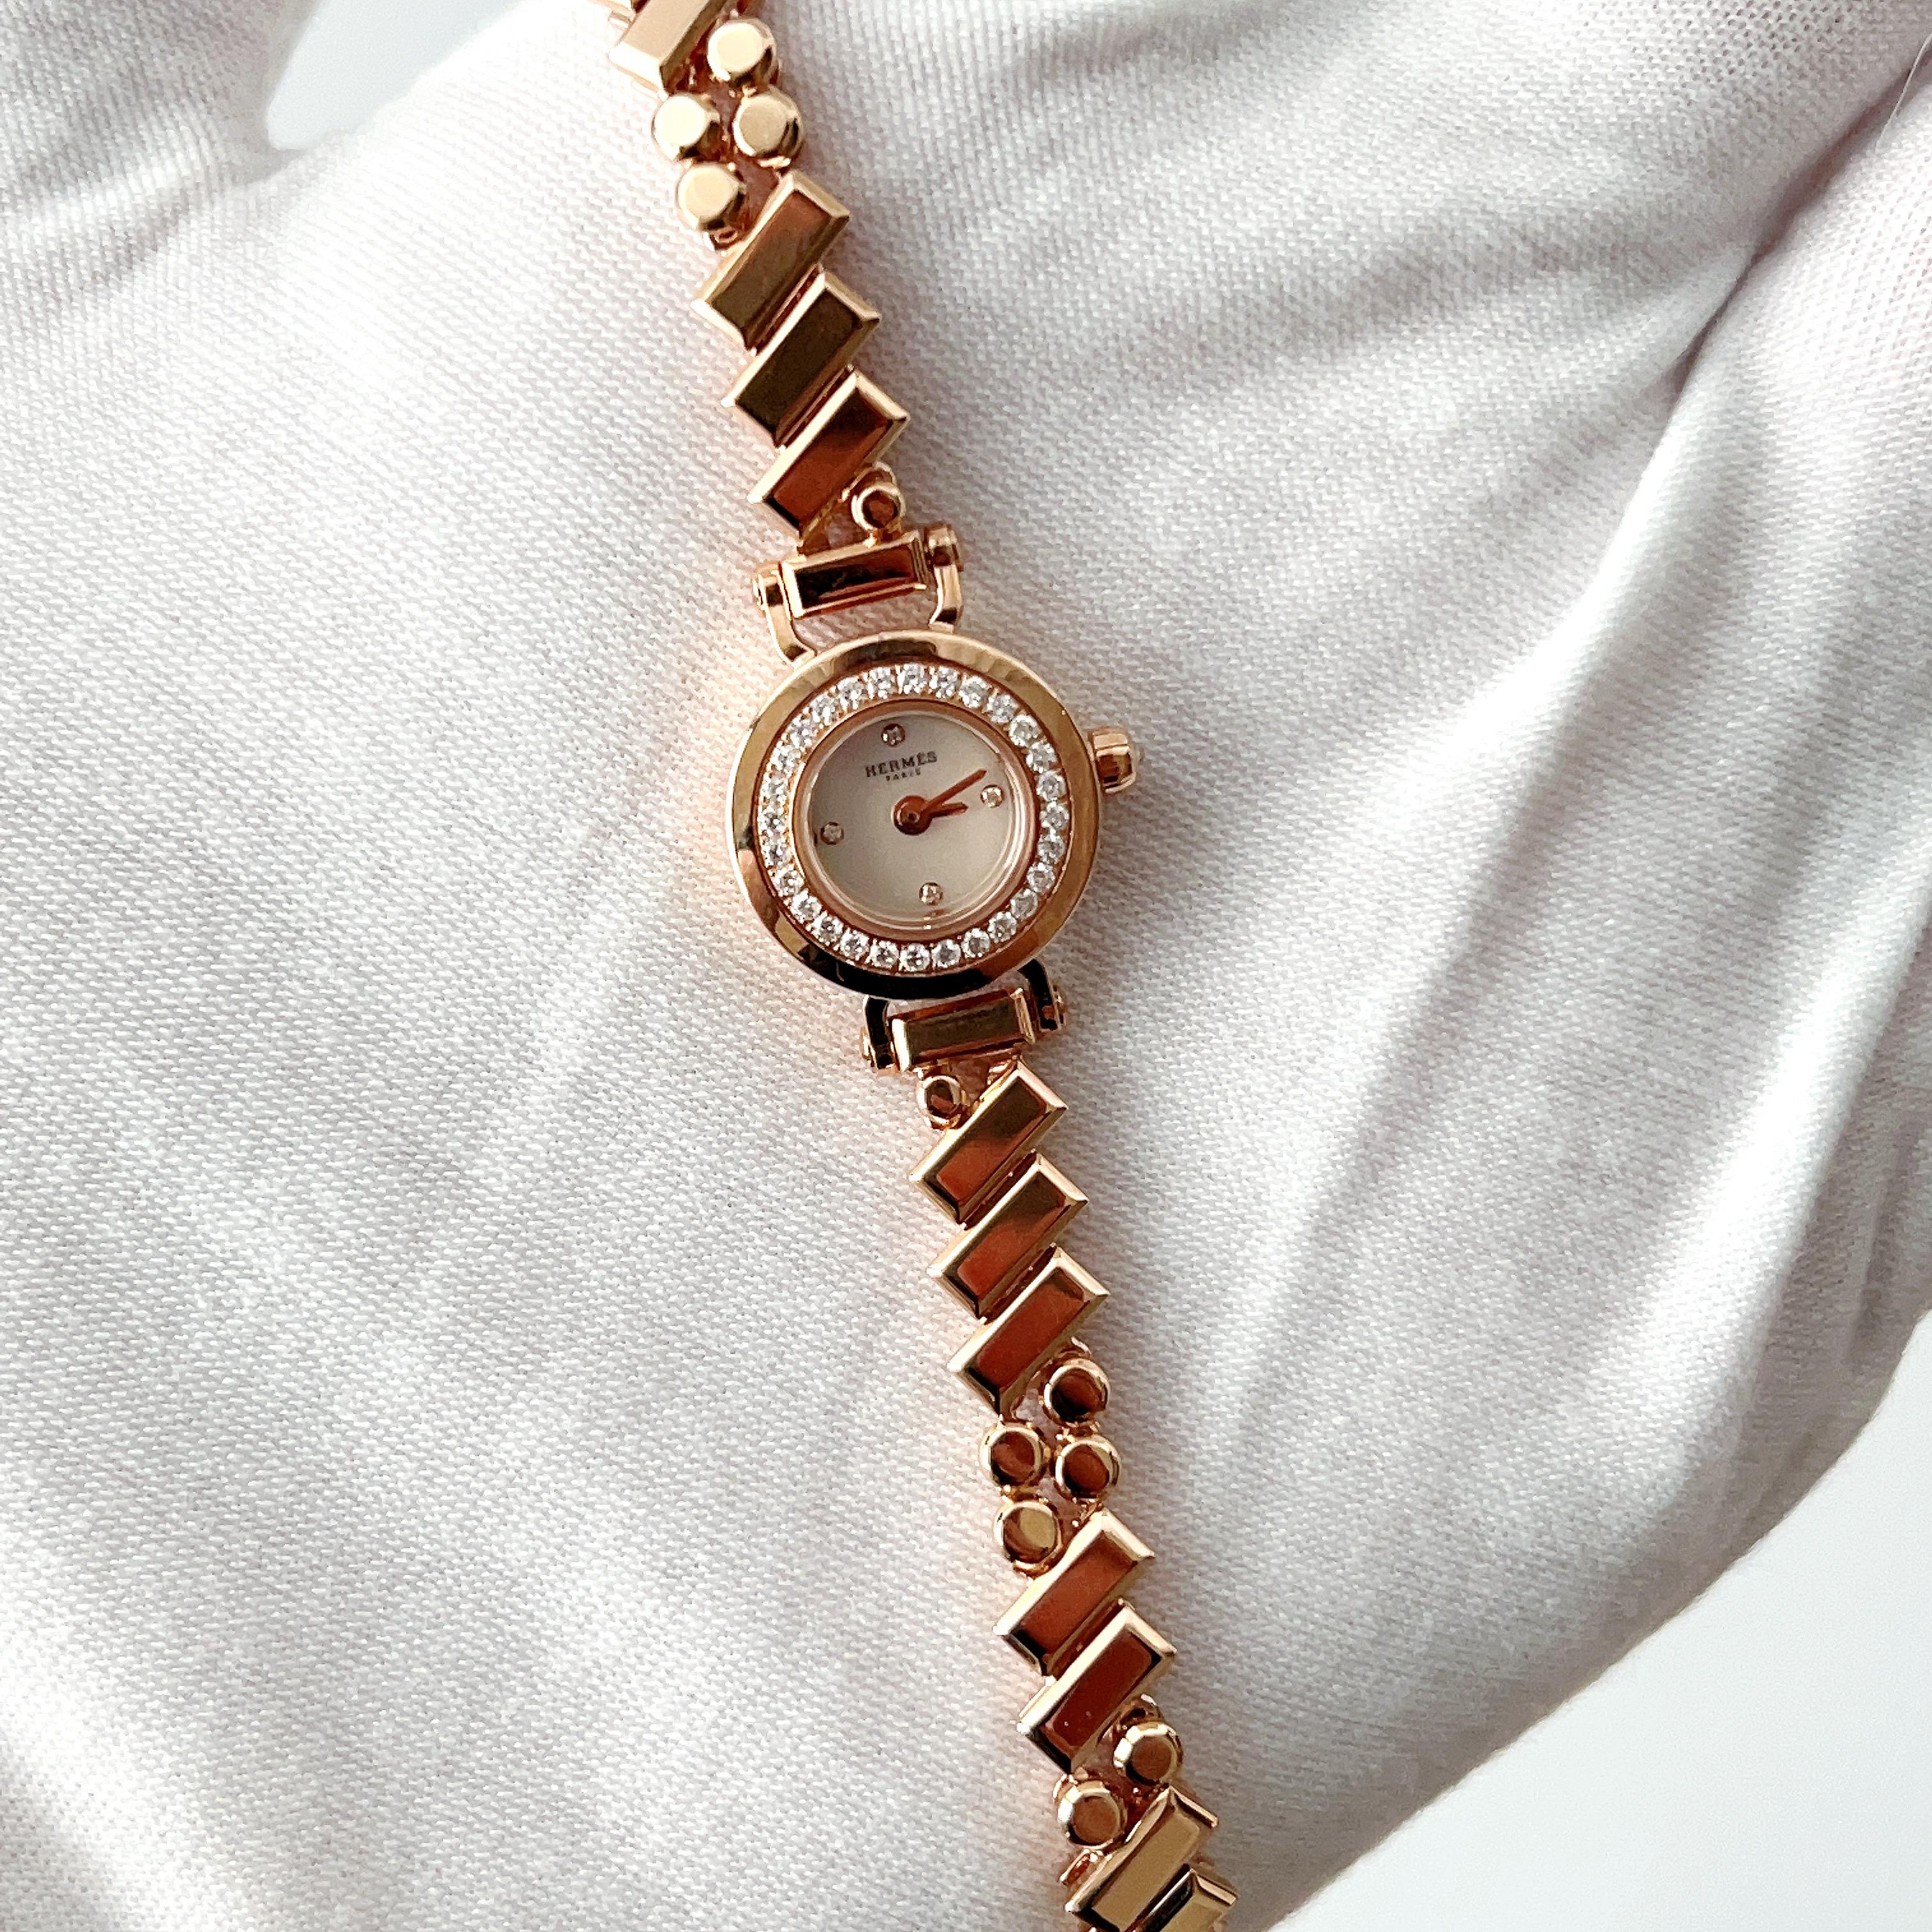 Contemporary Hermes Women's Faubourg Polka Watch In Rose Gold And Diamonds, Mini Model, 15.5m